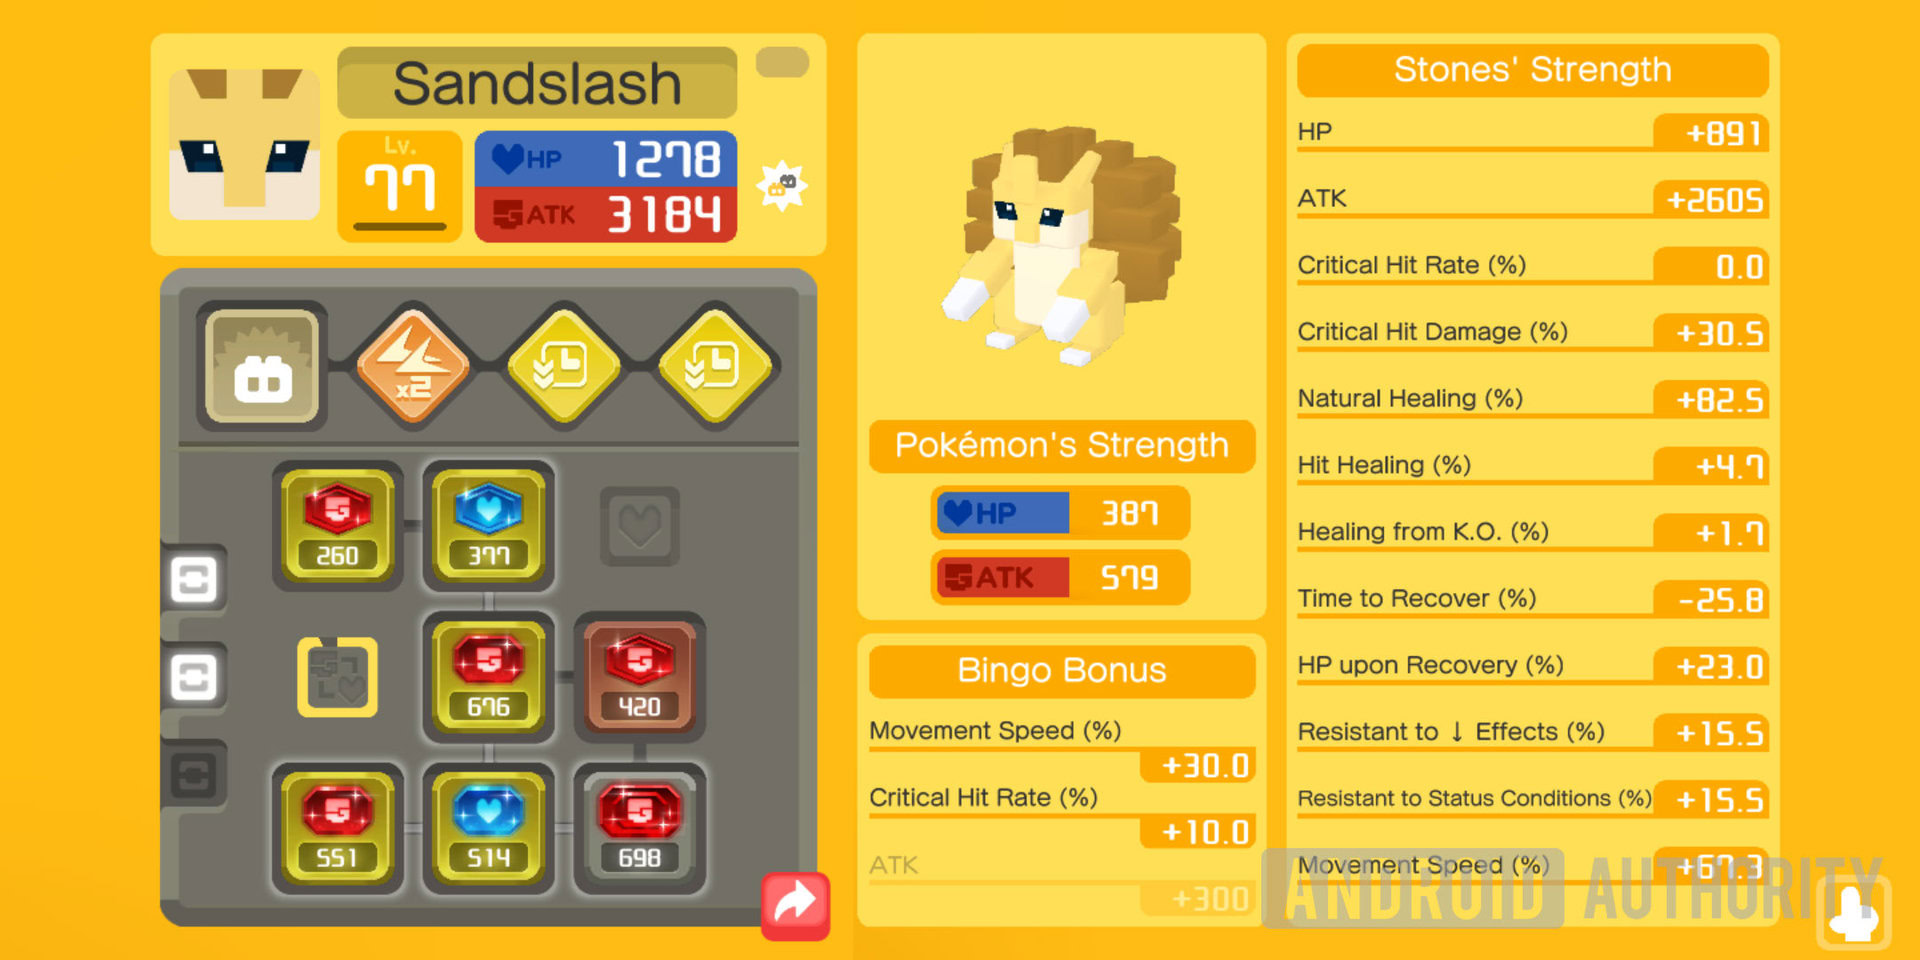 Pokémon Quest tips and tricks to be the very best